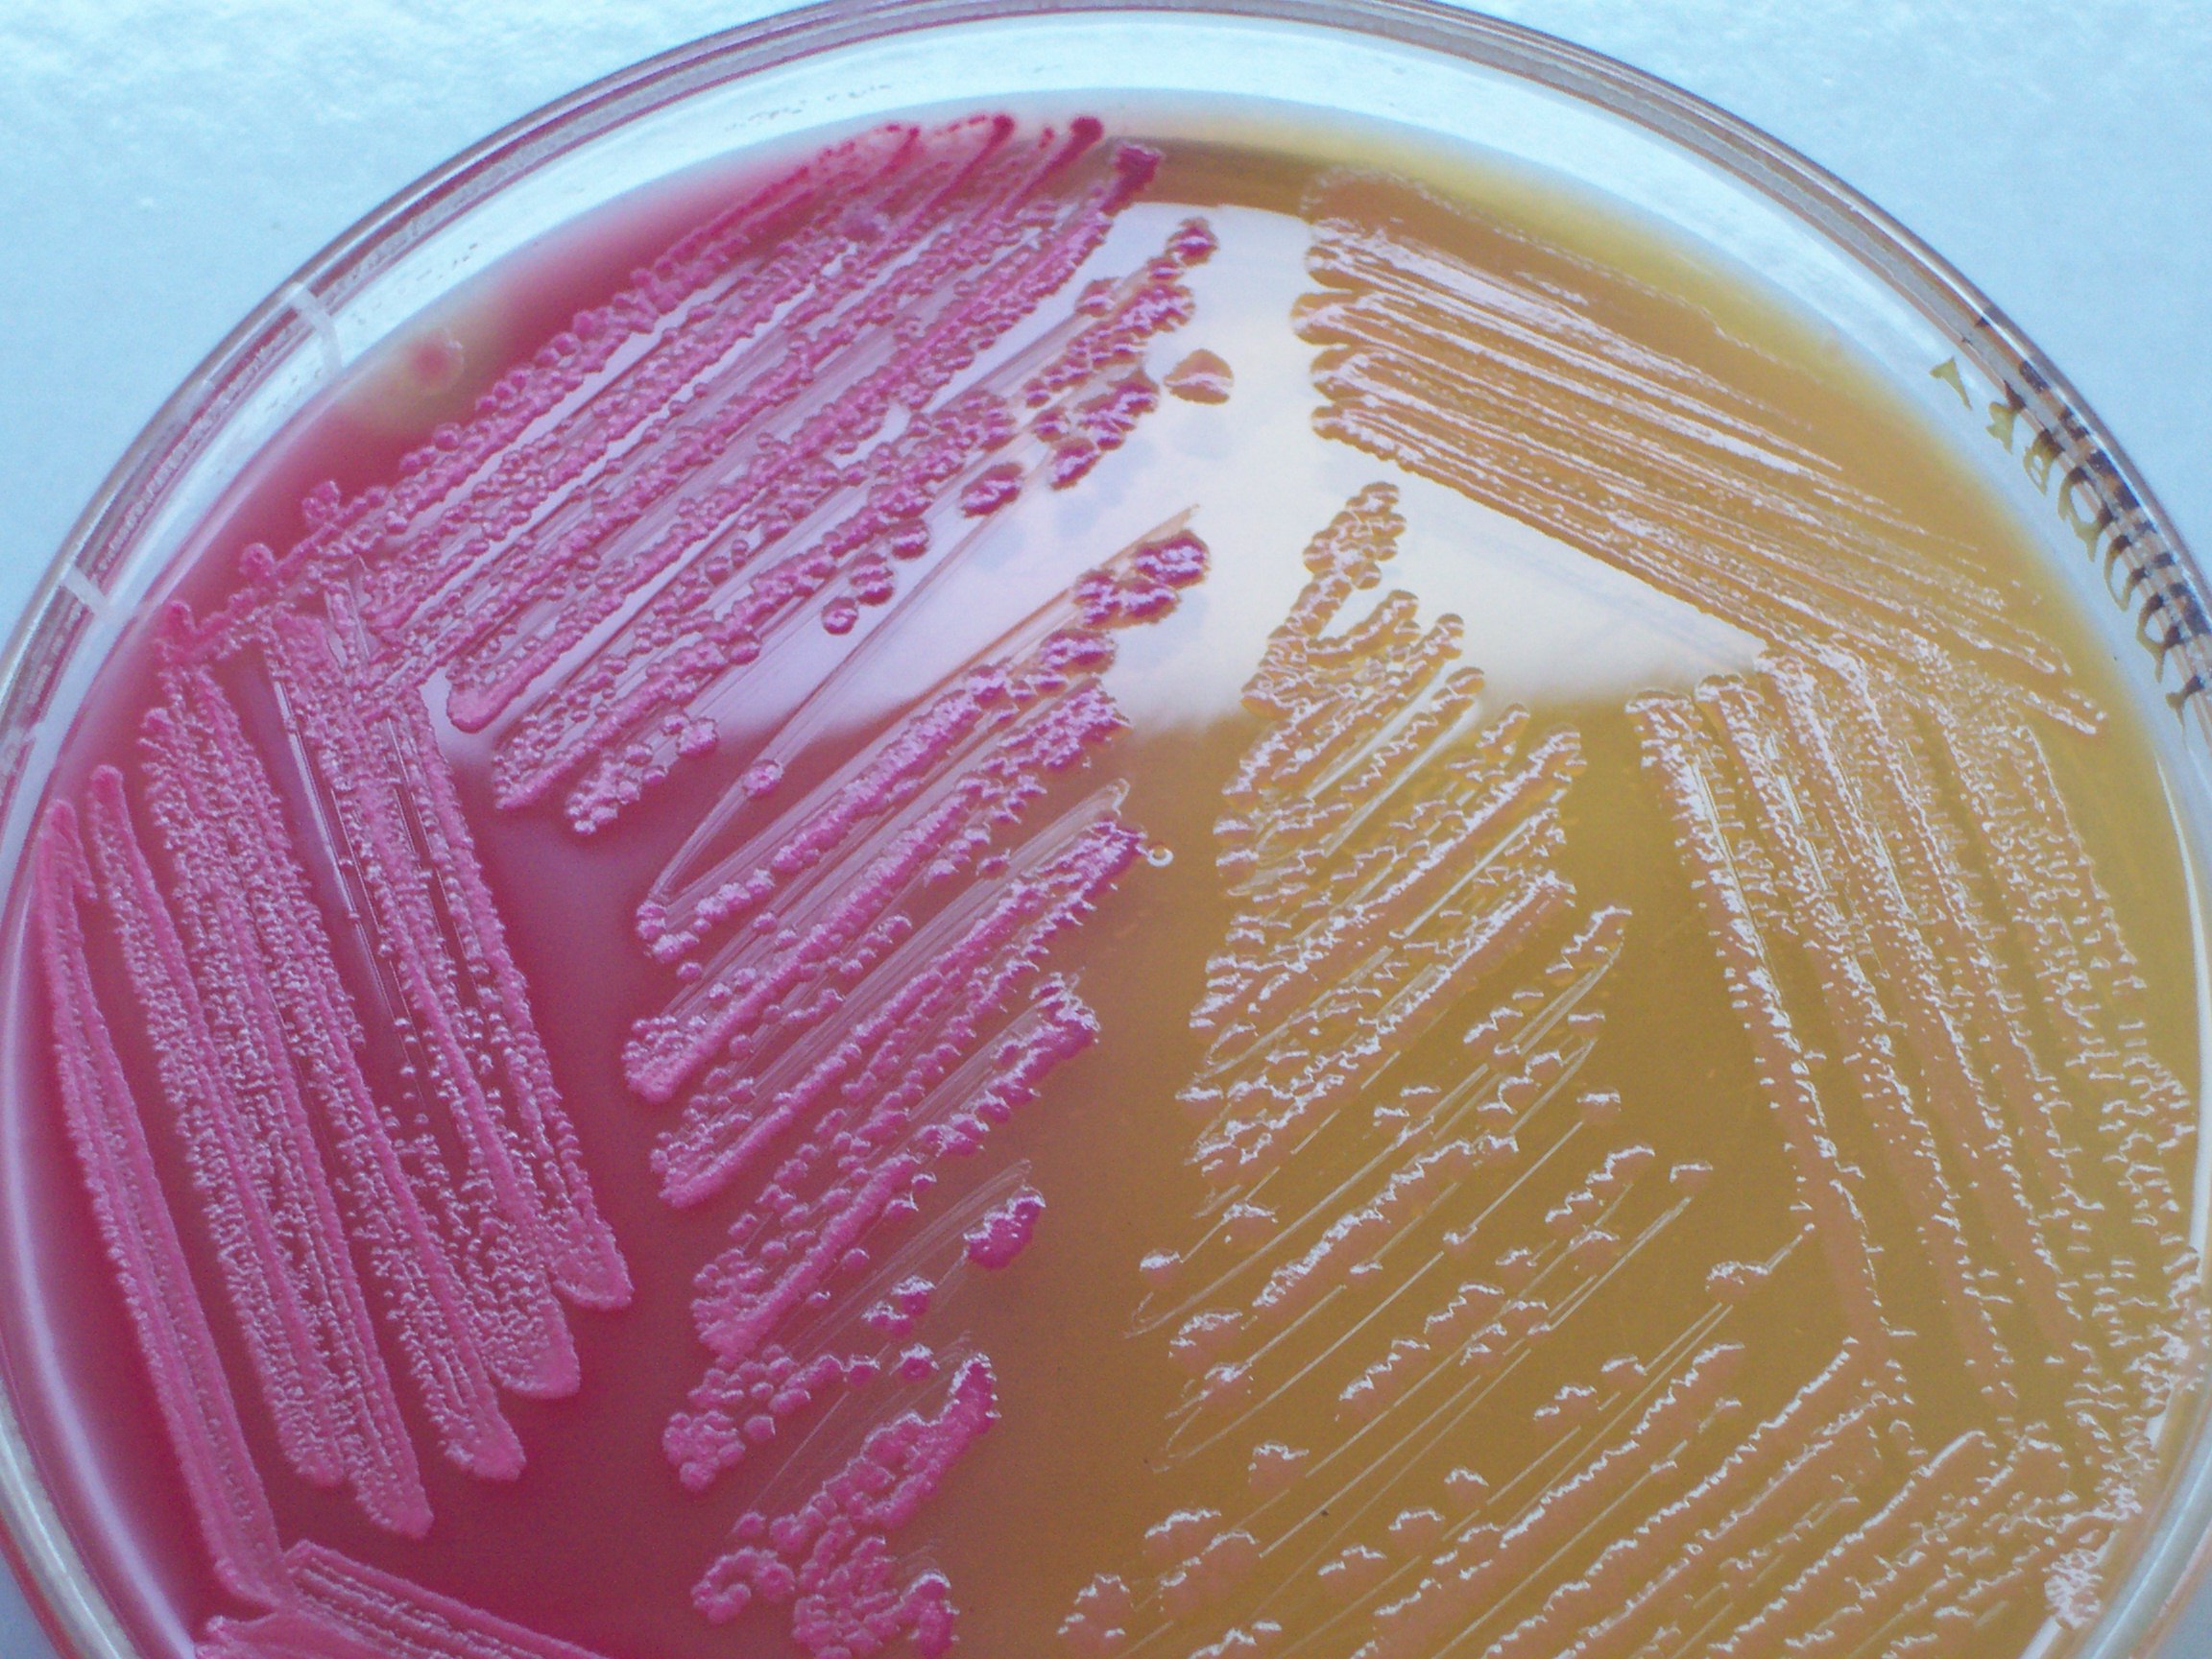 MacConkey’s agar showing both lactose and non-lactose fermenting colonies. Lactose fermenting colonies are pink whereas non-lactose fermenting ones are colourless or appear same as the medium.